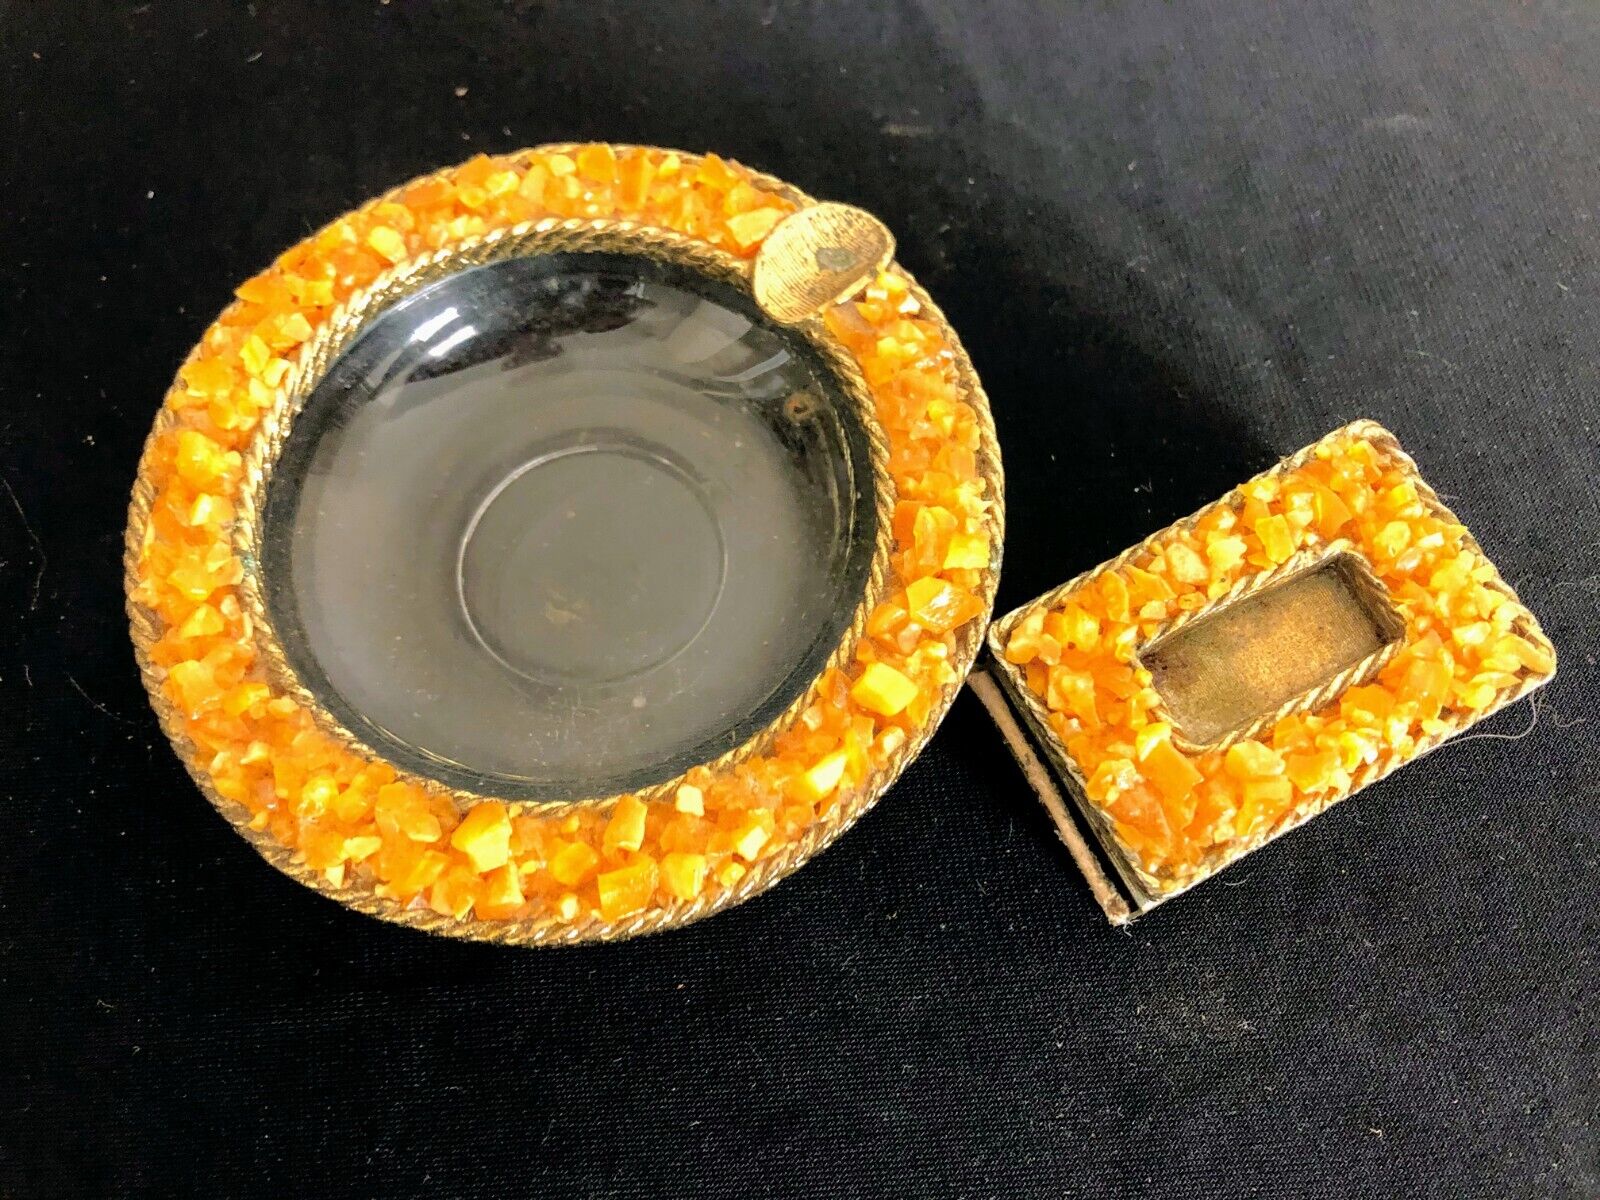 Rare Vintage Crushed Rough Cut Crystals Amber Ashtray W/ Matching Match Case